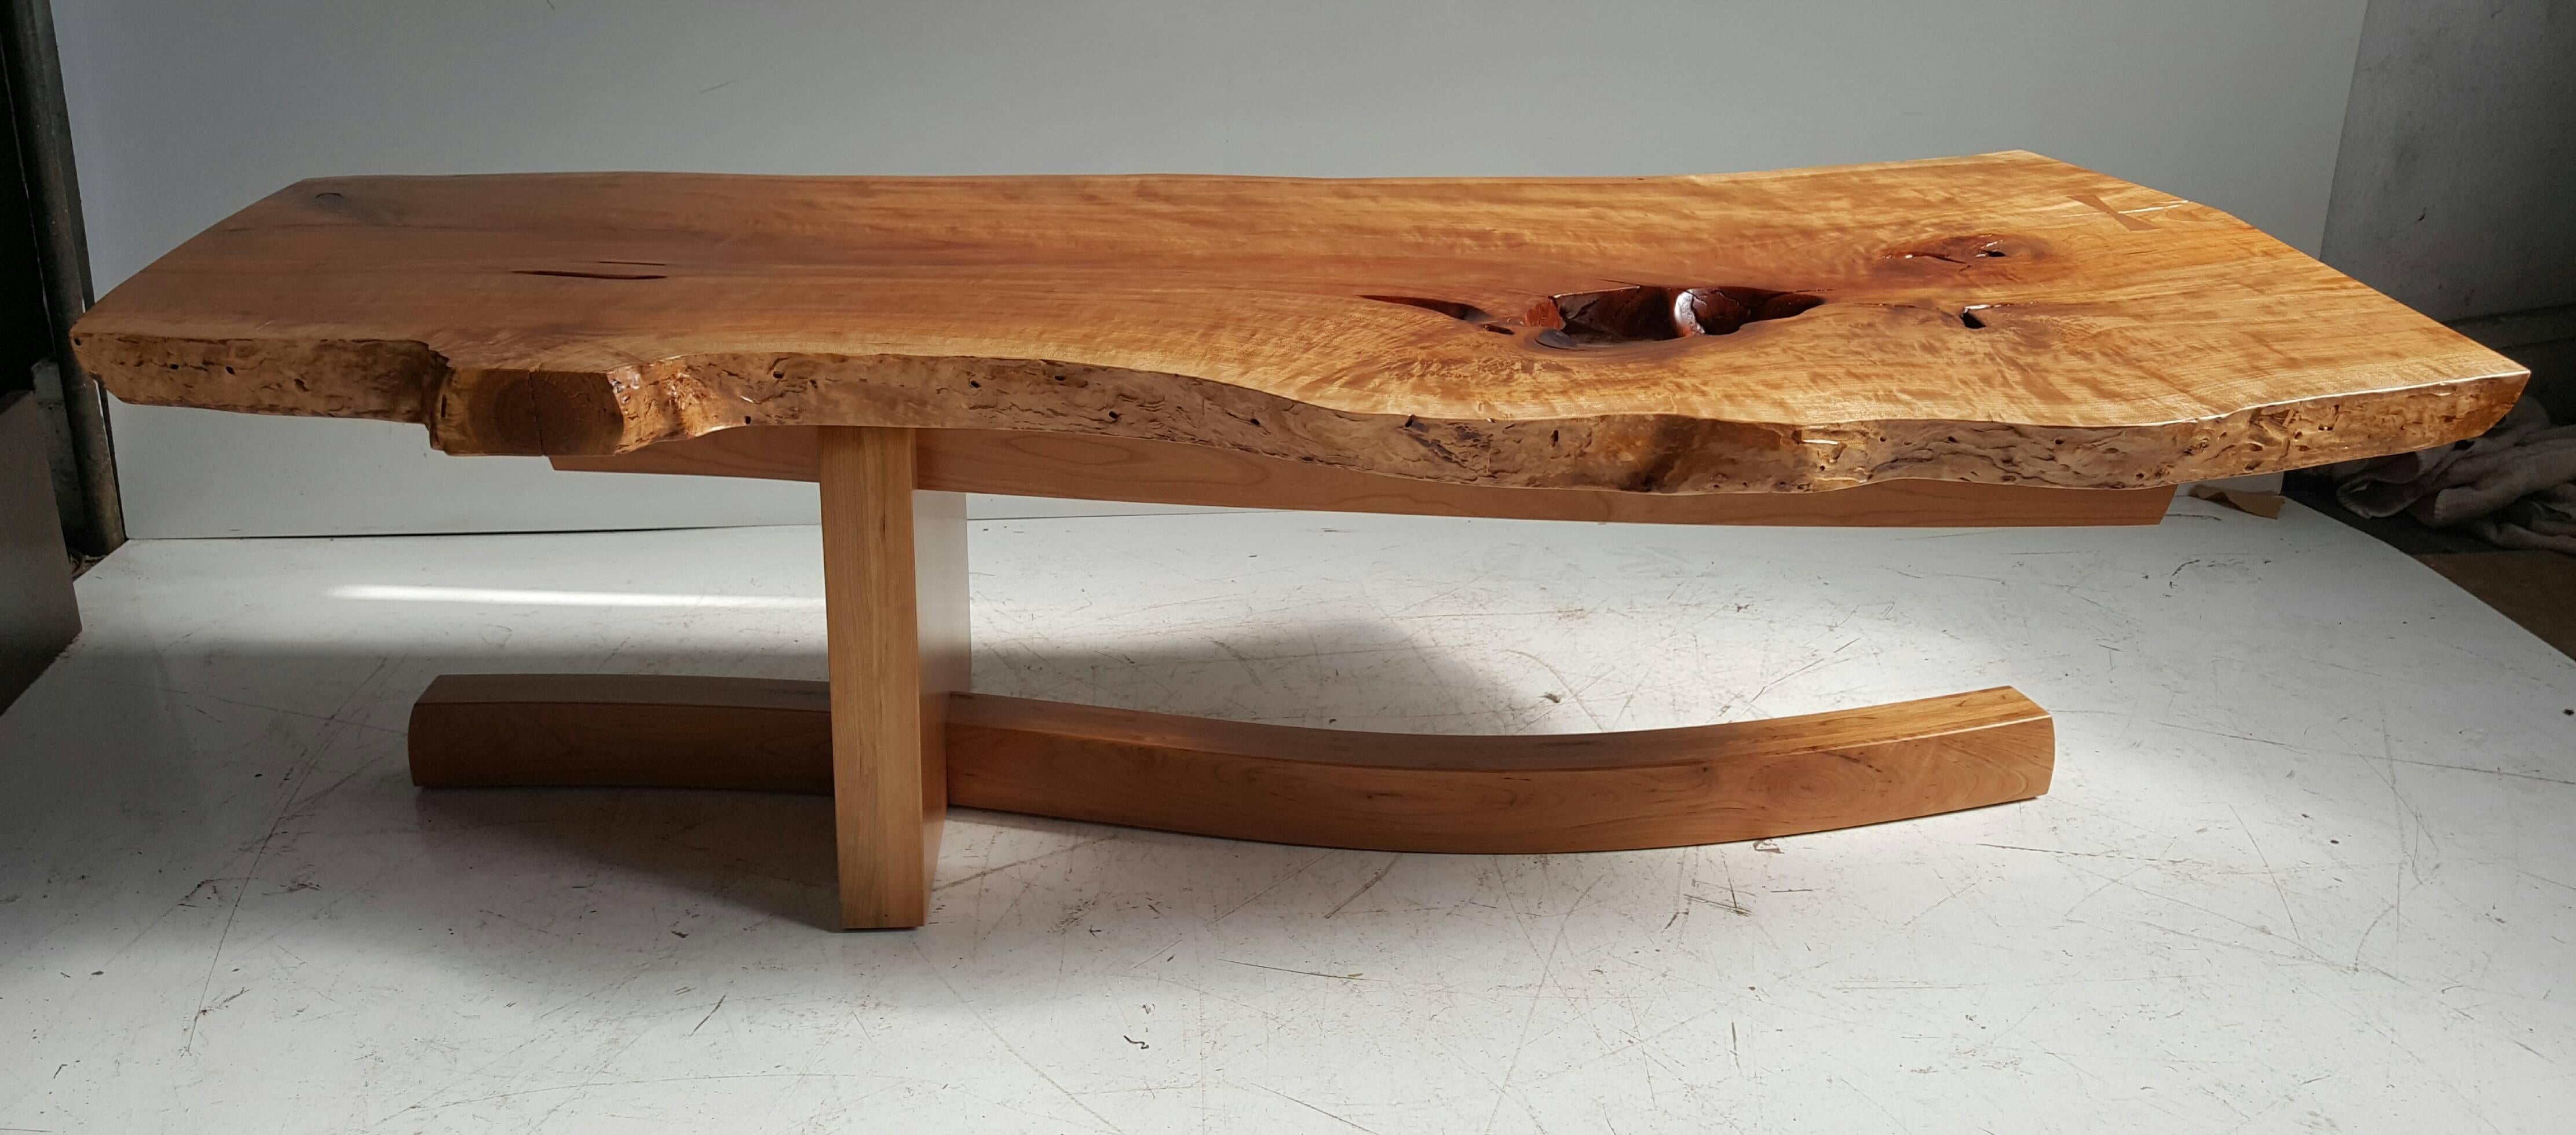 Figured cherry modernist table, Griff Logan.
Exhibits : 2013 arts council for wyoming county, Perry, NY, “local color” 2007–present ashwood artisans, east aurora, NY education: 1987-1988 graphic careers design school, Rochester, NY, illustration,